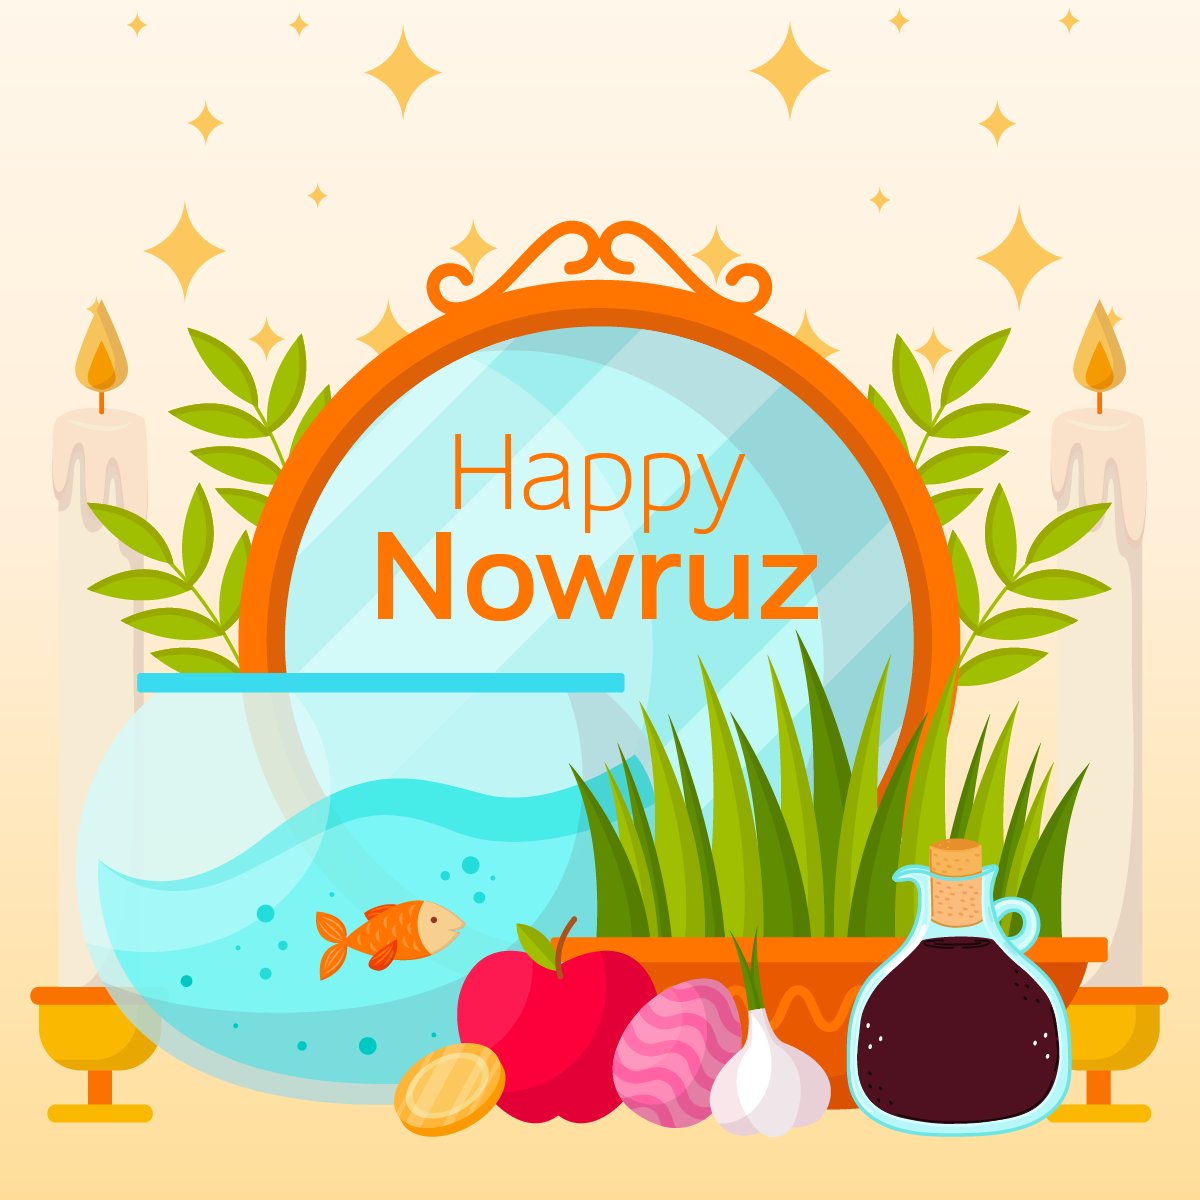 On this first day of spring, families and communities across Canada and throughout the world, are coming together to celebrate Nowruz, which embodies the spirit of new beginnings. For many, Nowruz offers an opportunity for introspection, gratitude, and spiritual renewal.